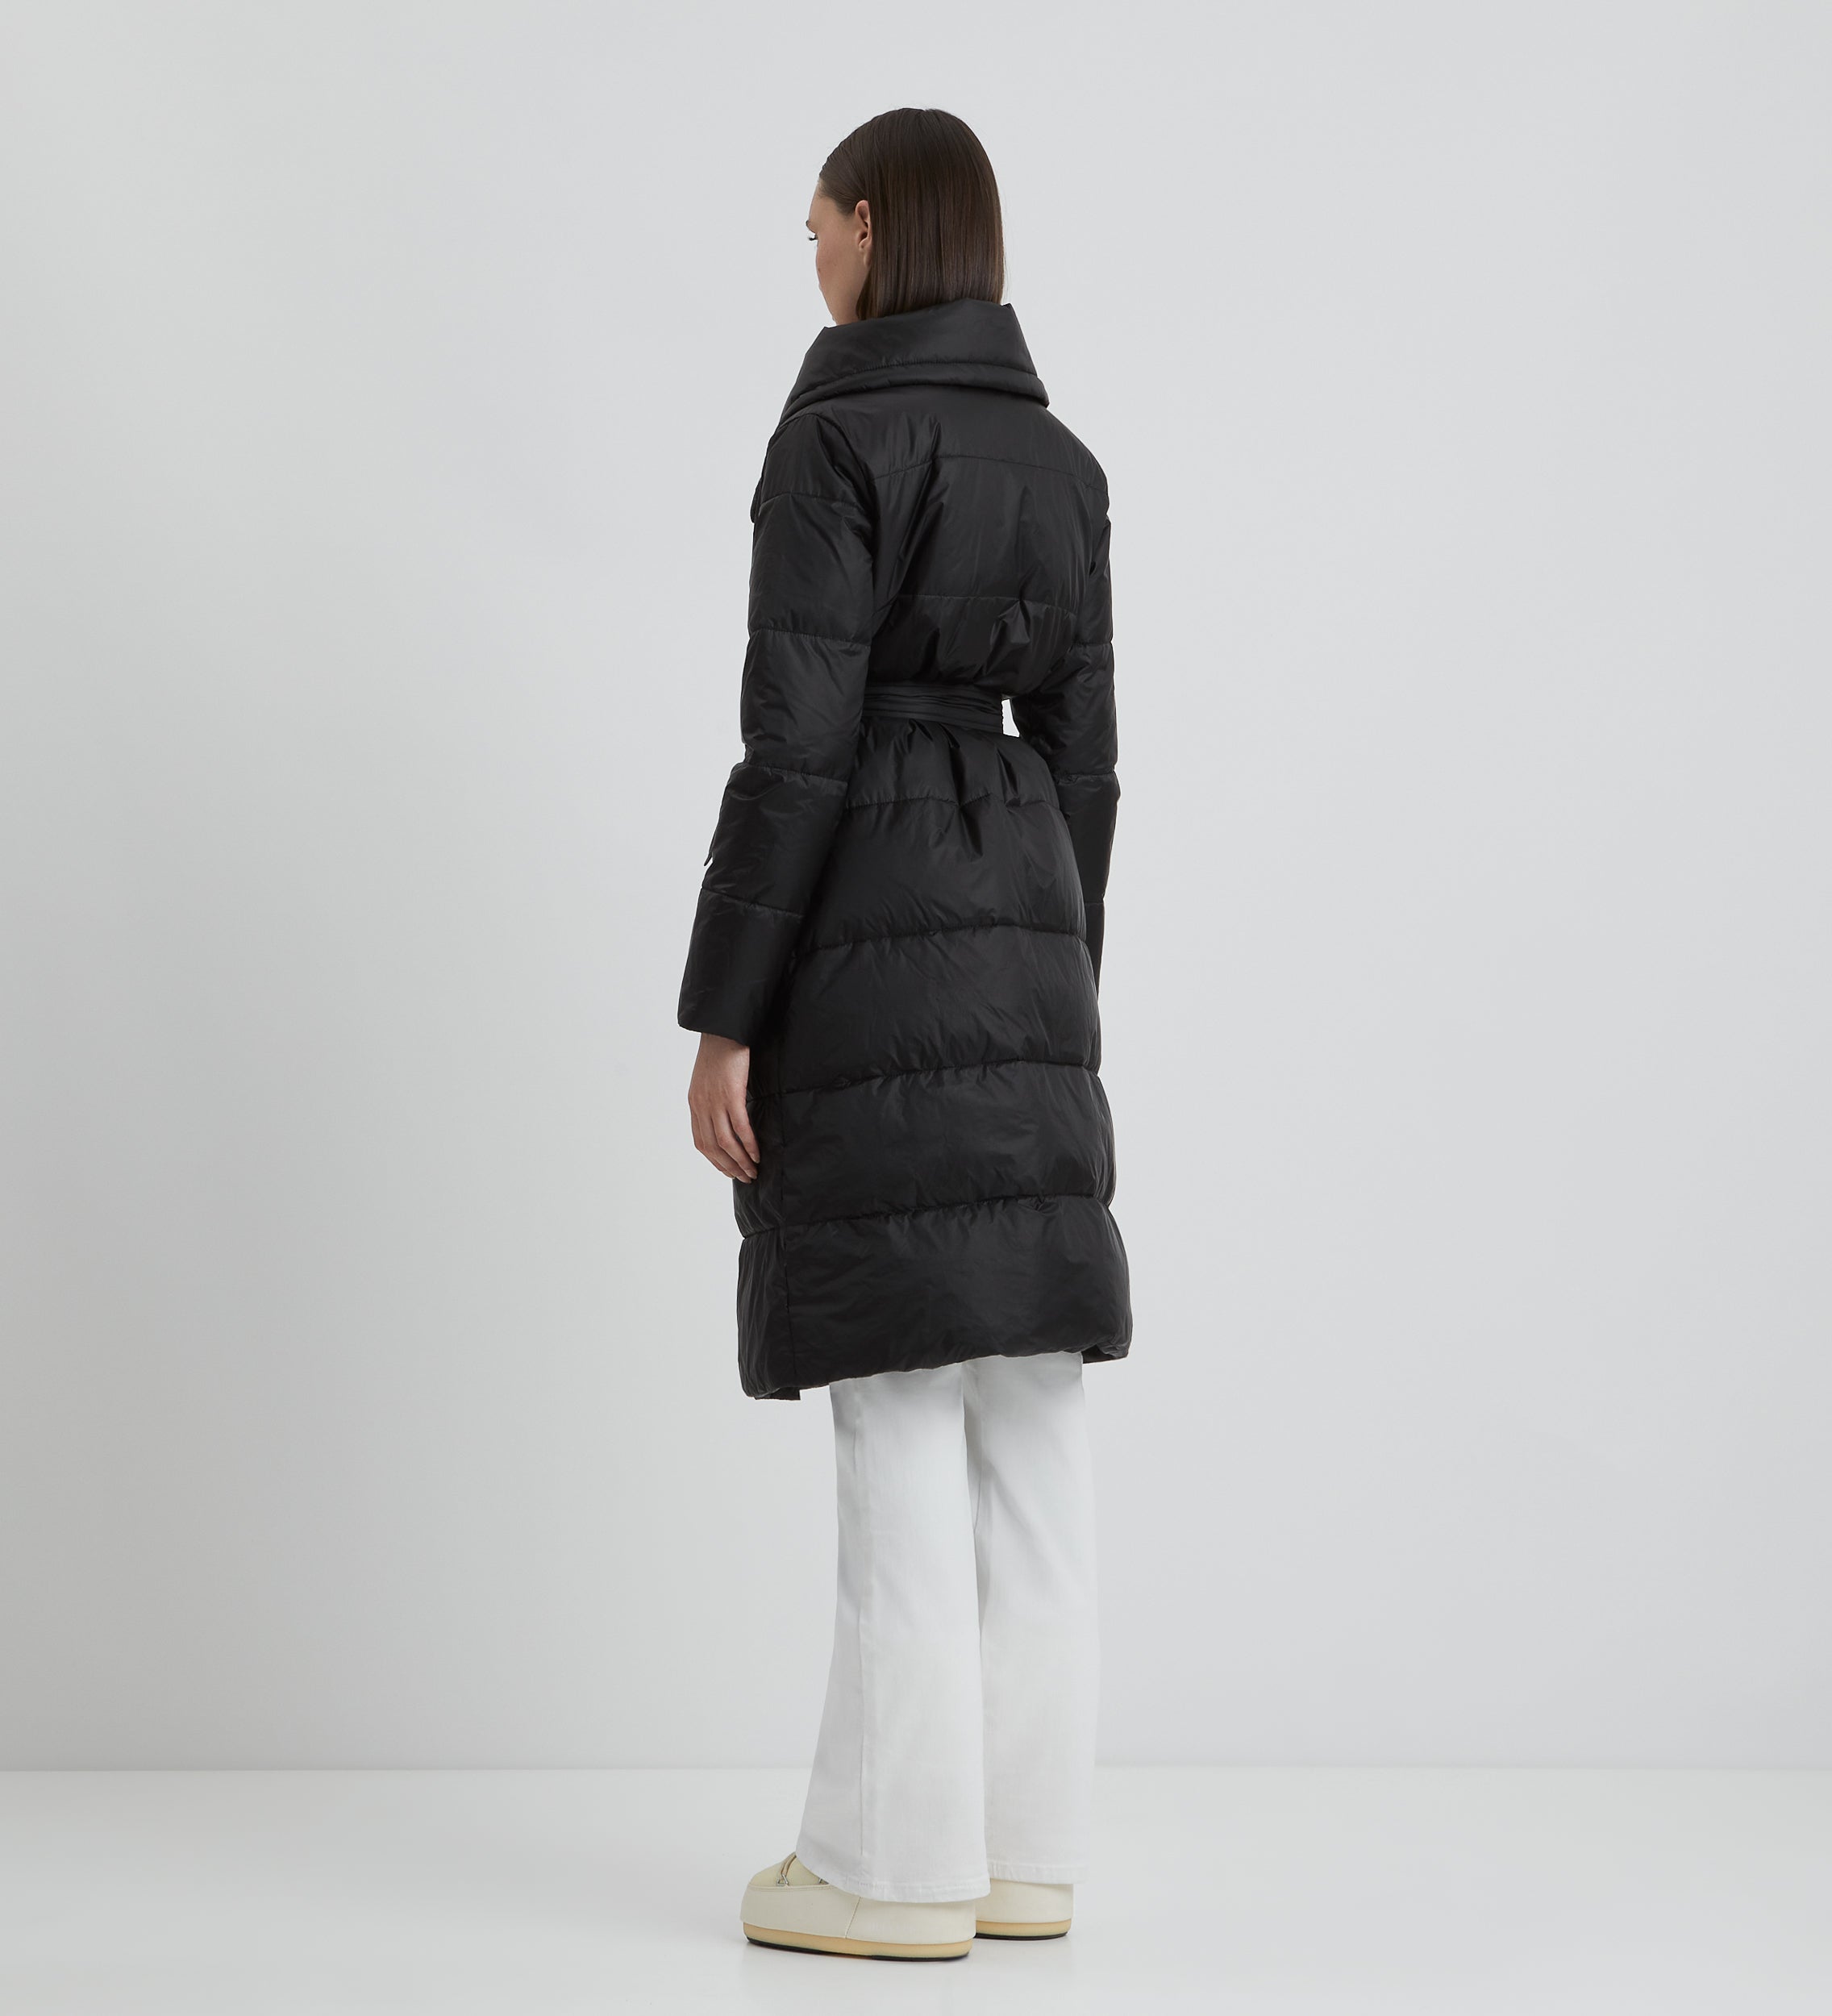 Long parka with chimney collar